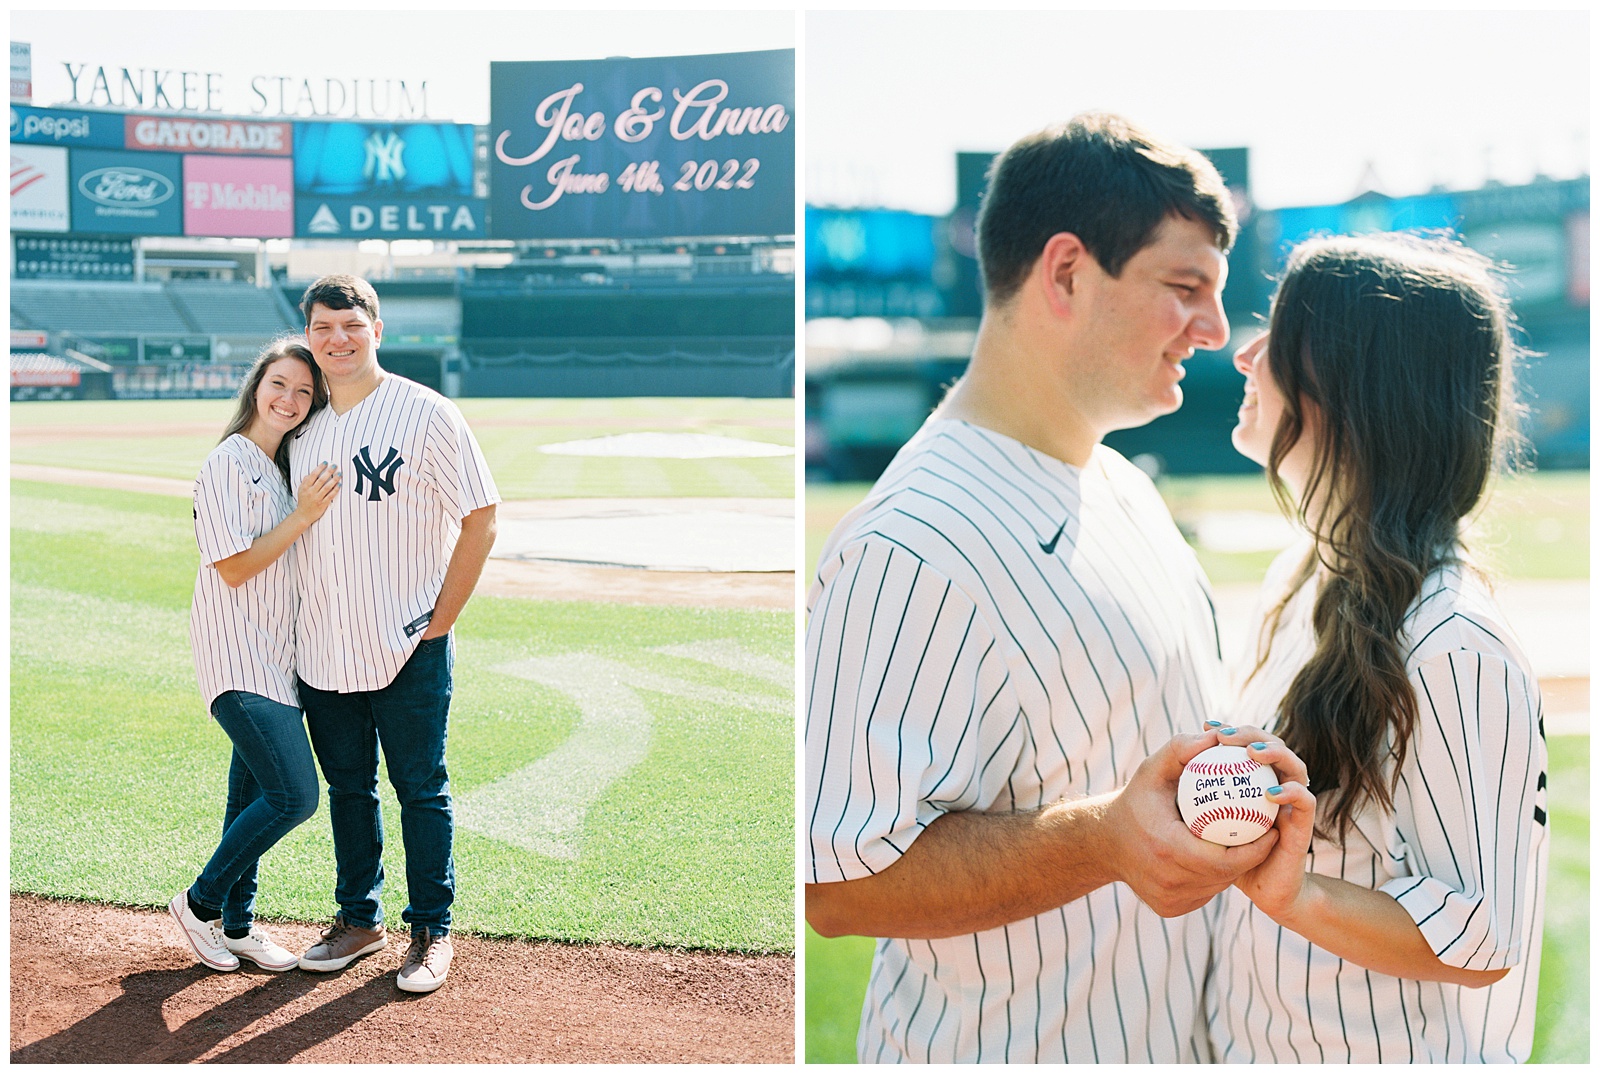 engaged couple stands on baseball field during Yankee Stadium Engagement Session